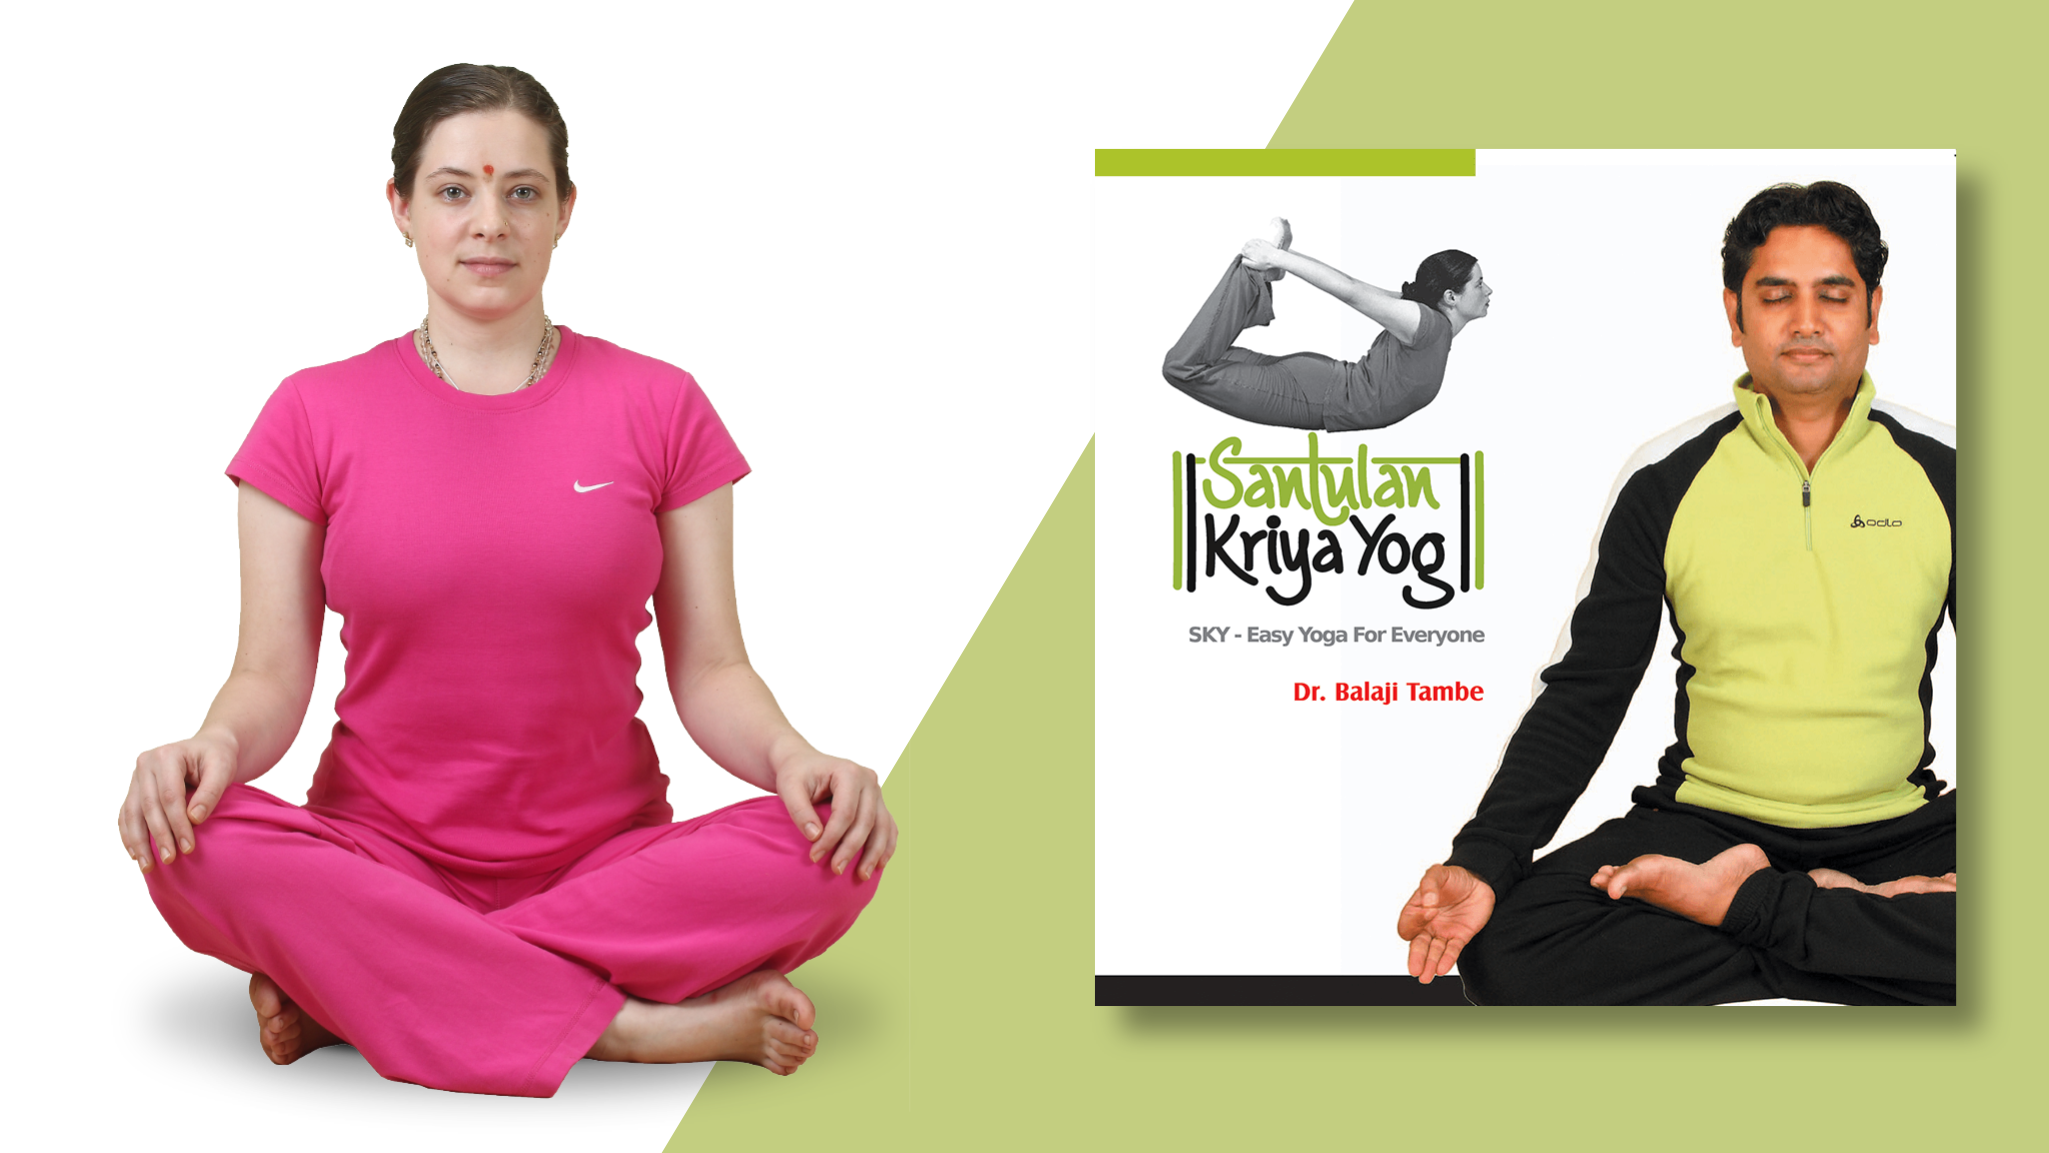 Sukhasana - A simple sitting posture for comfort and stability